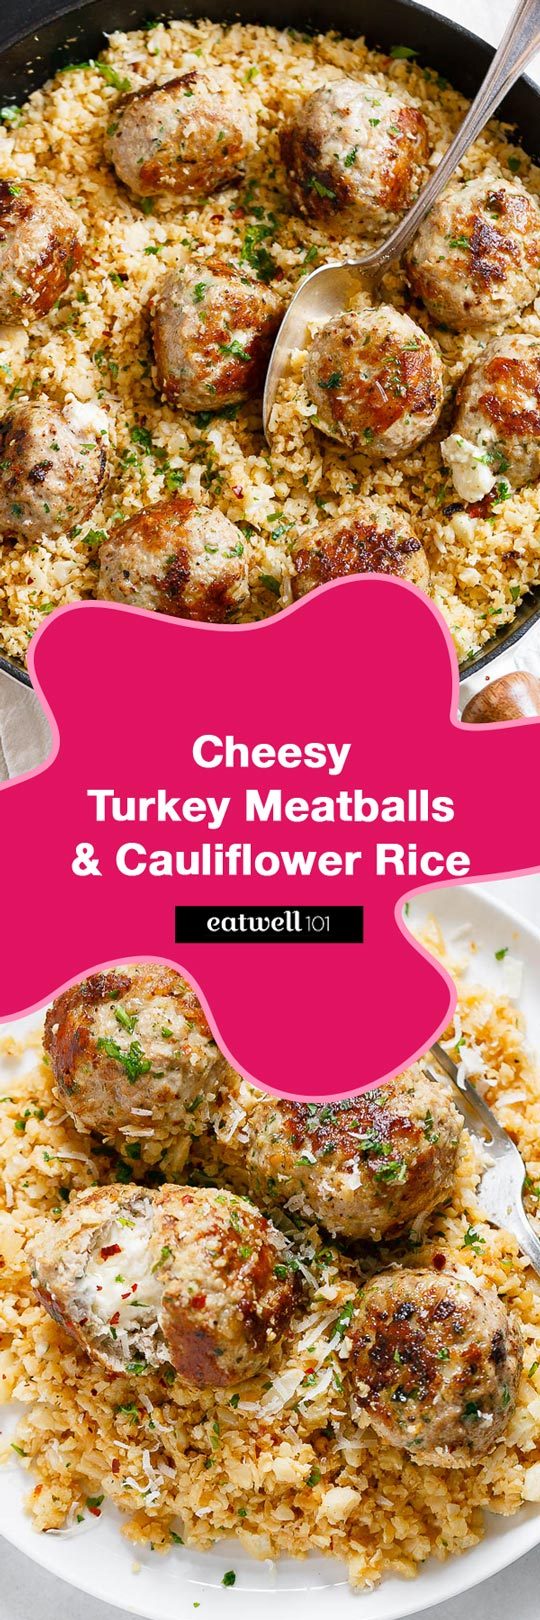 Cheesy Stuffed Turkey Meatballs with Cauliflower Rice - A rich and indulgent plate of comfort with a healthy twist! 